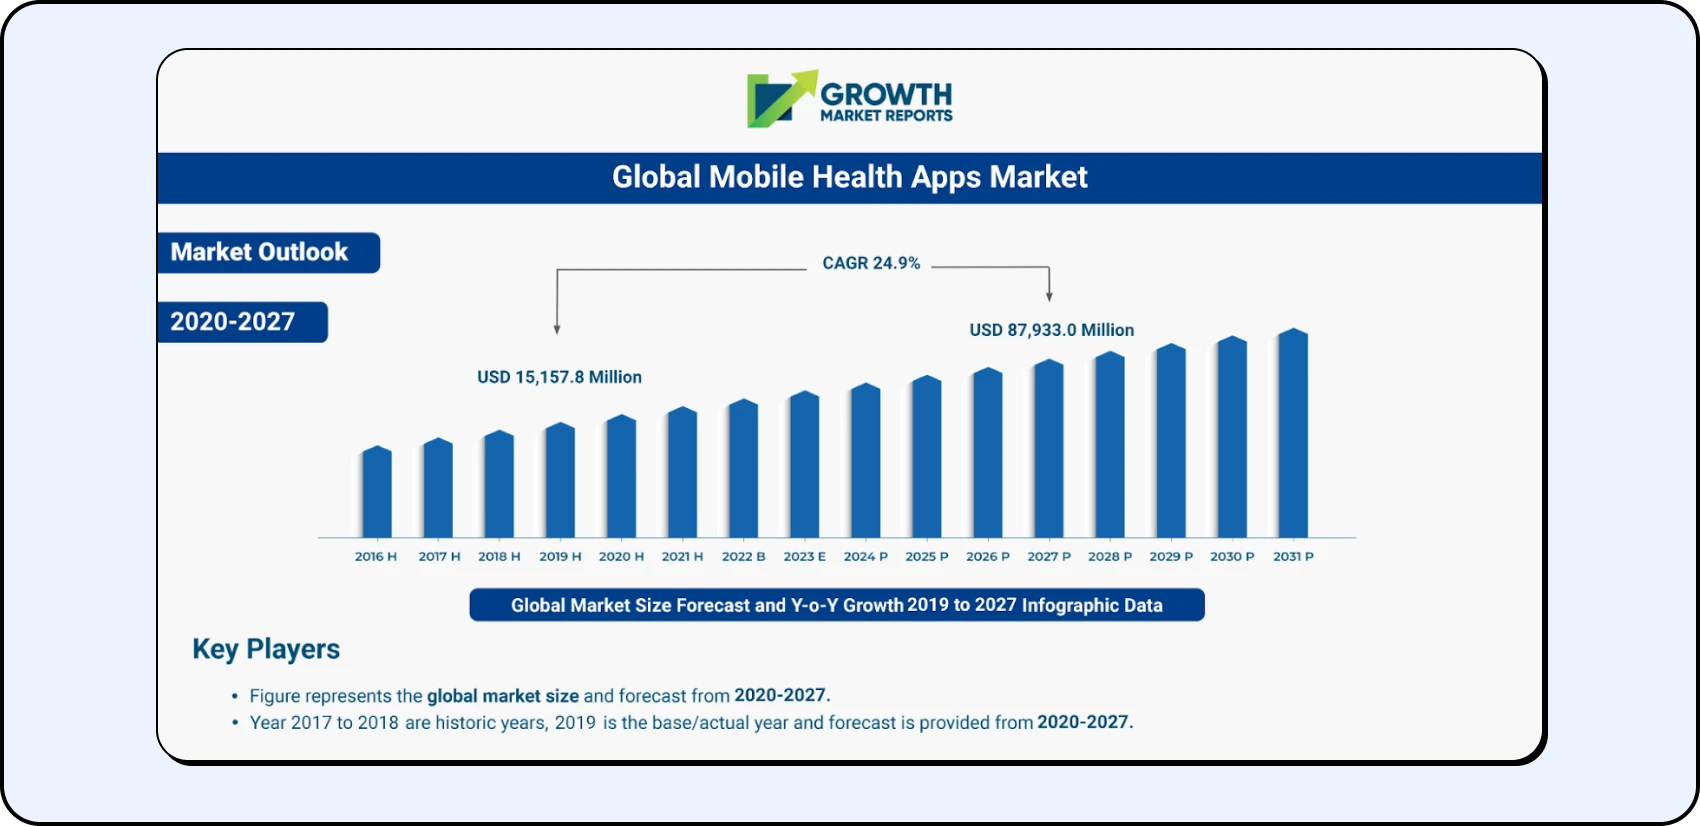 Global Mobile Health Apps Market Chart by Growth Market Reports